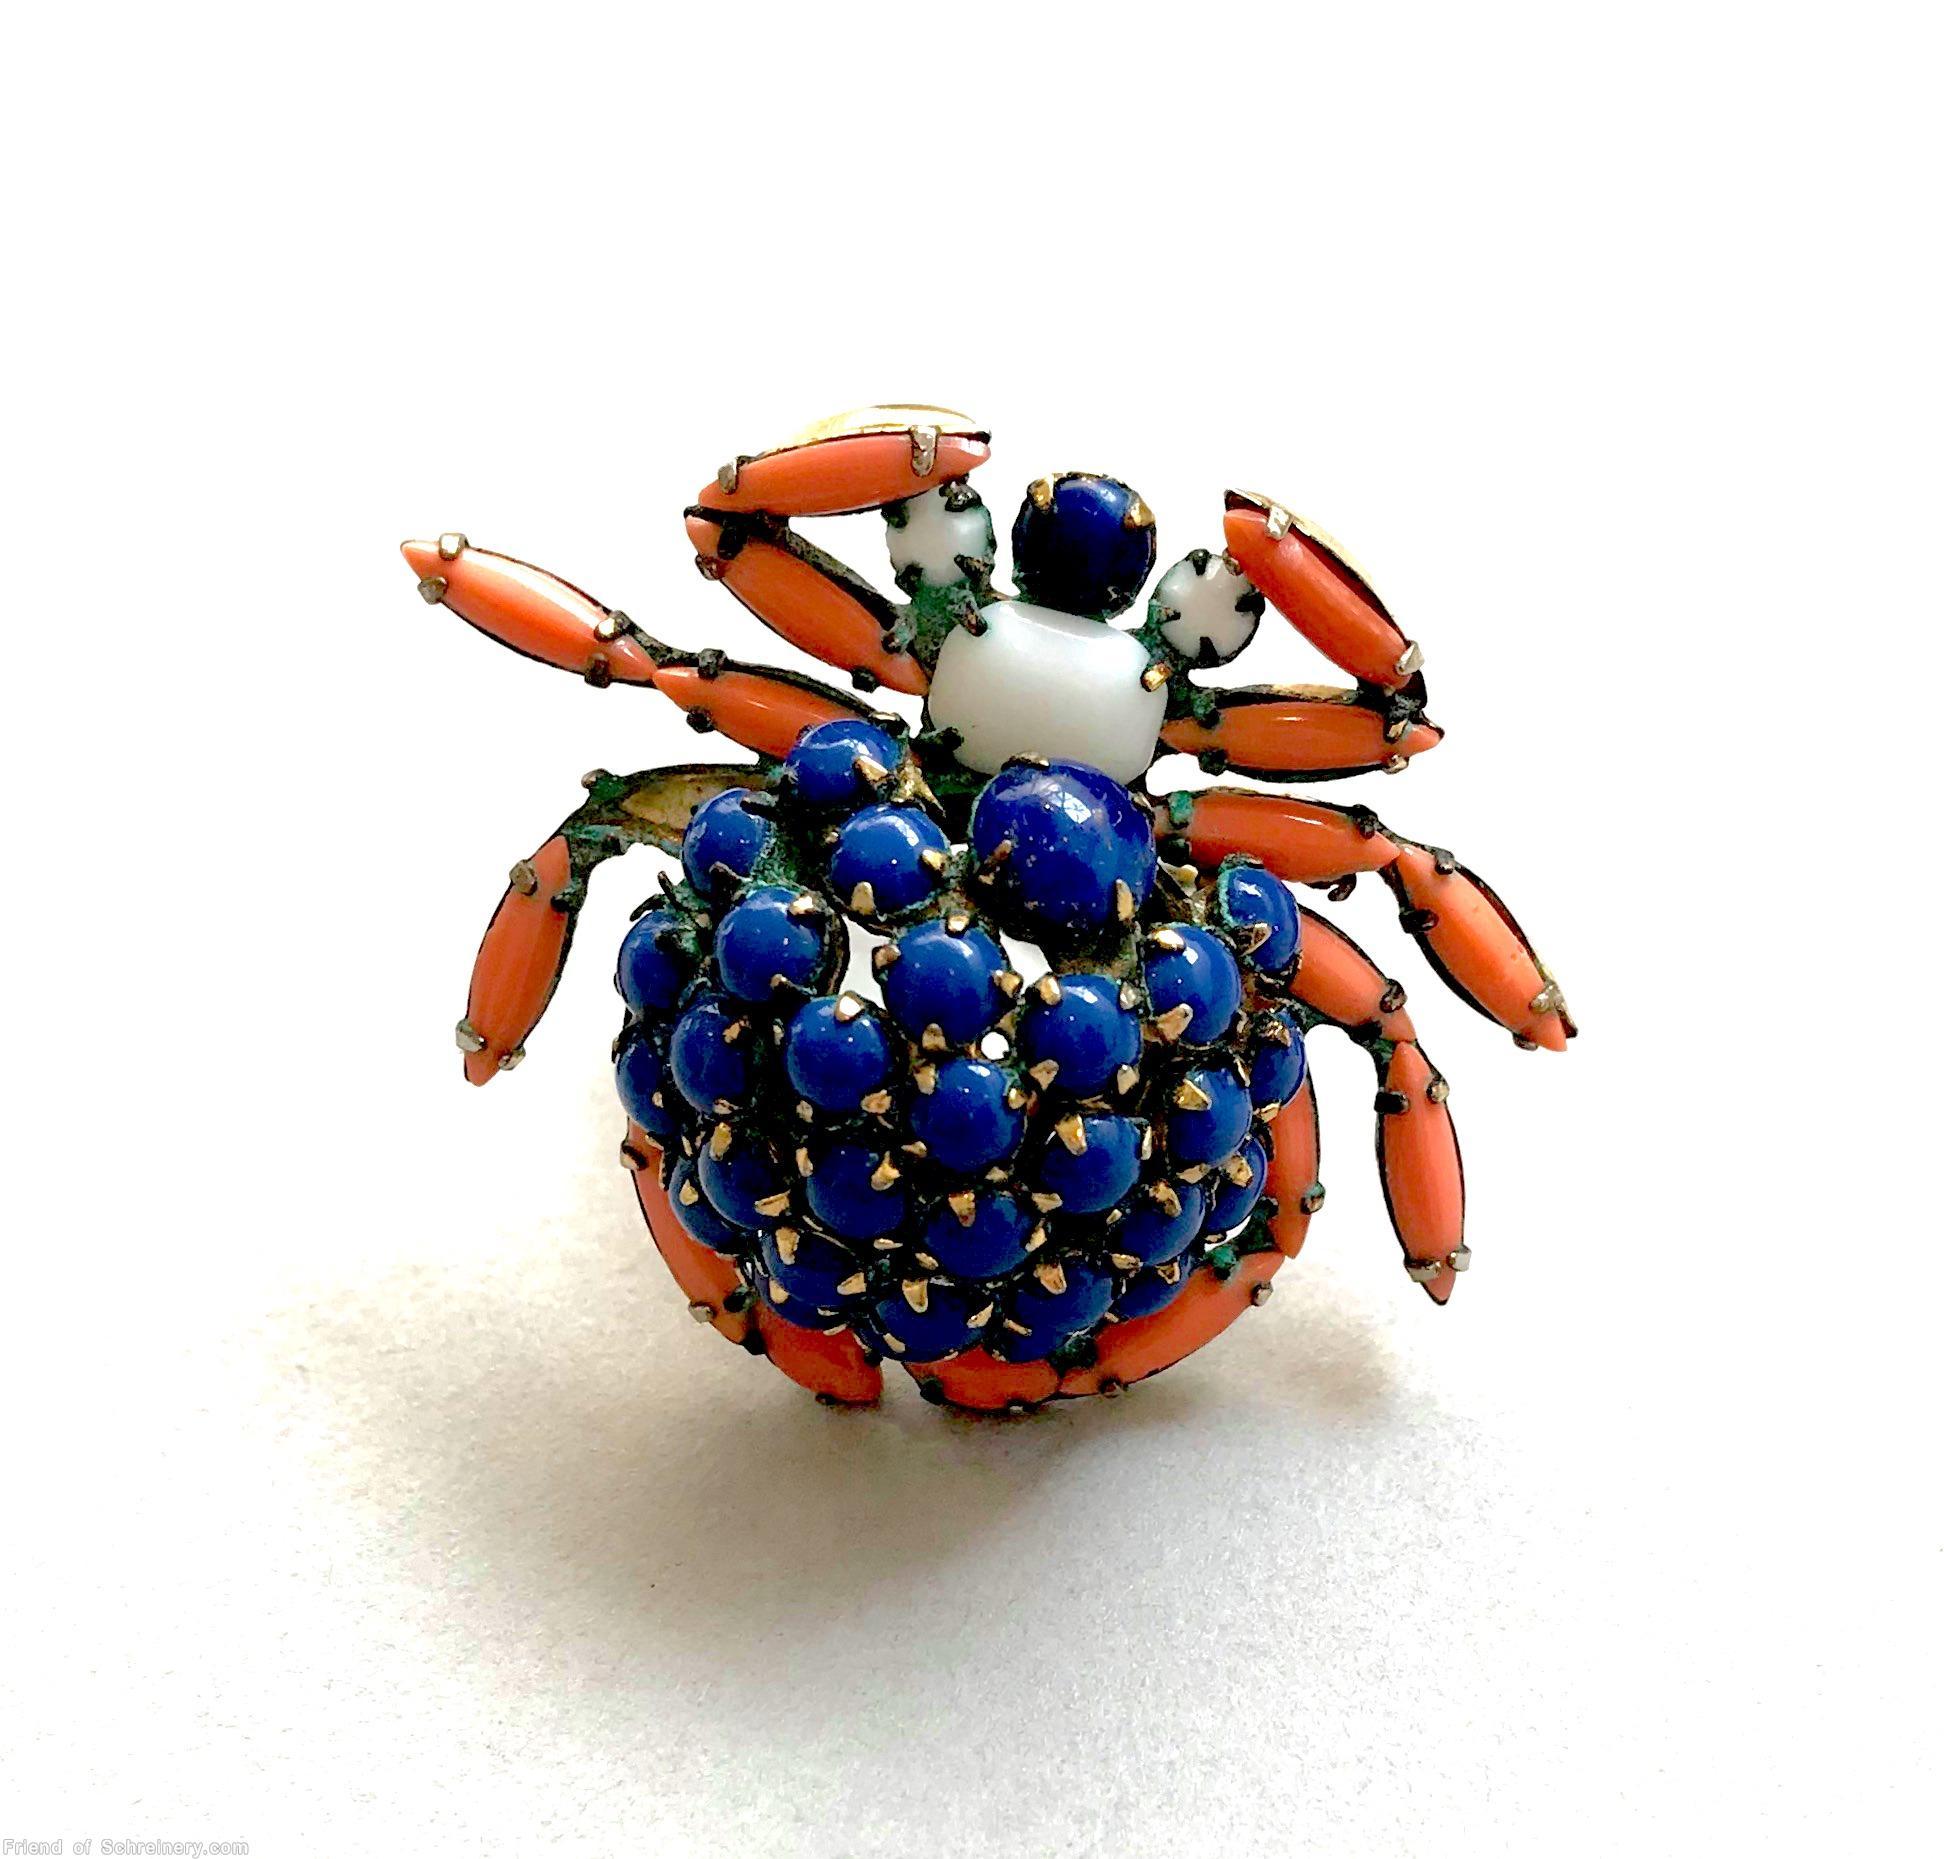 Schreiner spider domed round clustered body 6 navette leg coral navette leg white lapis blue chaton body goldtone jewelry